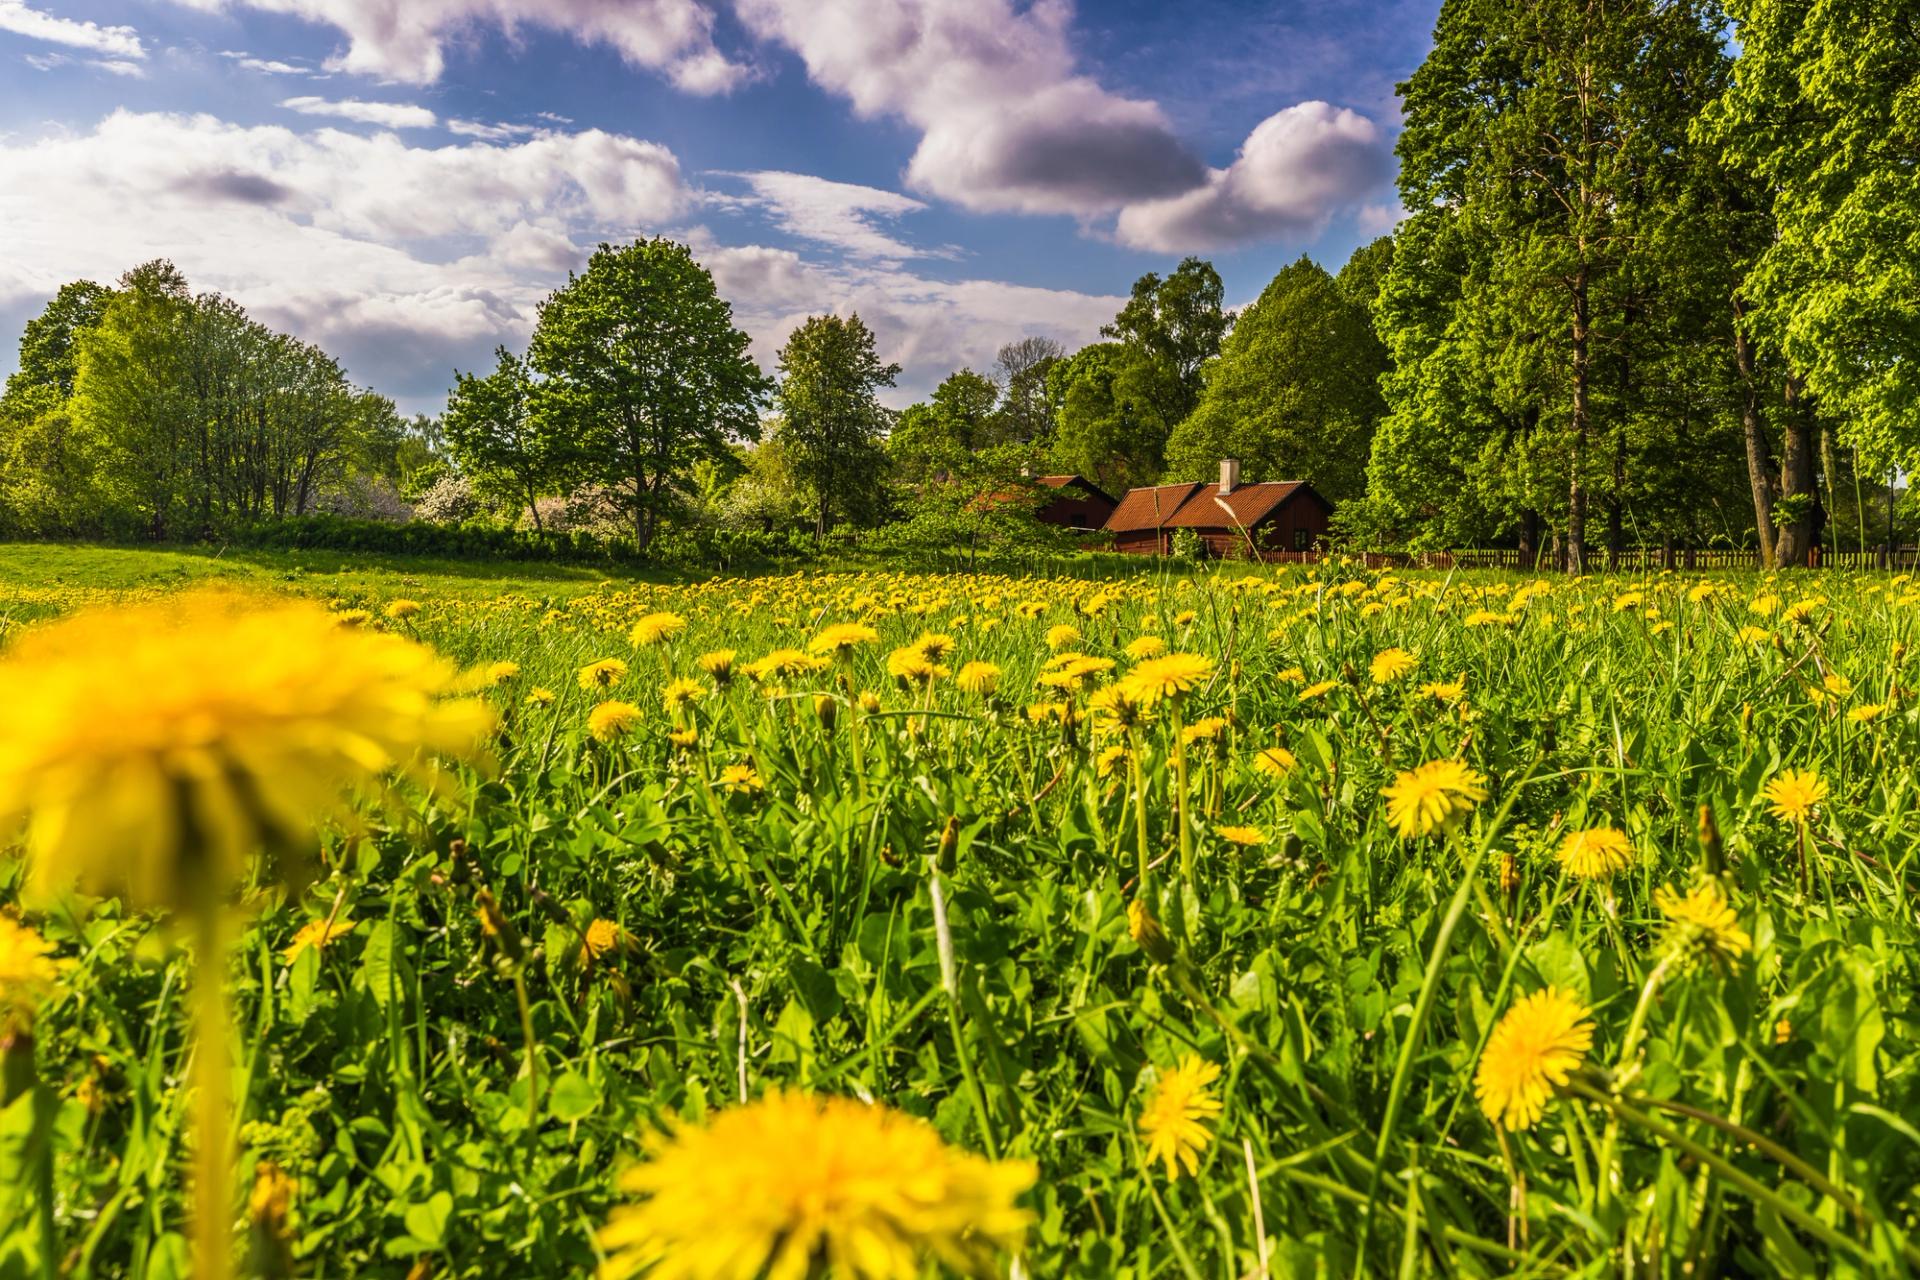  A field of dandelions on a summer day with a rustic cabin in the background outside of Uppsala